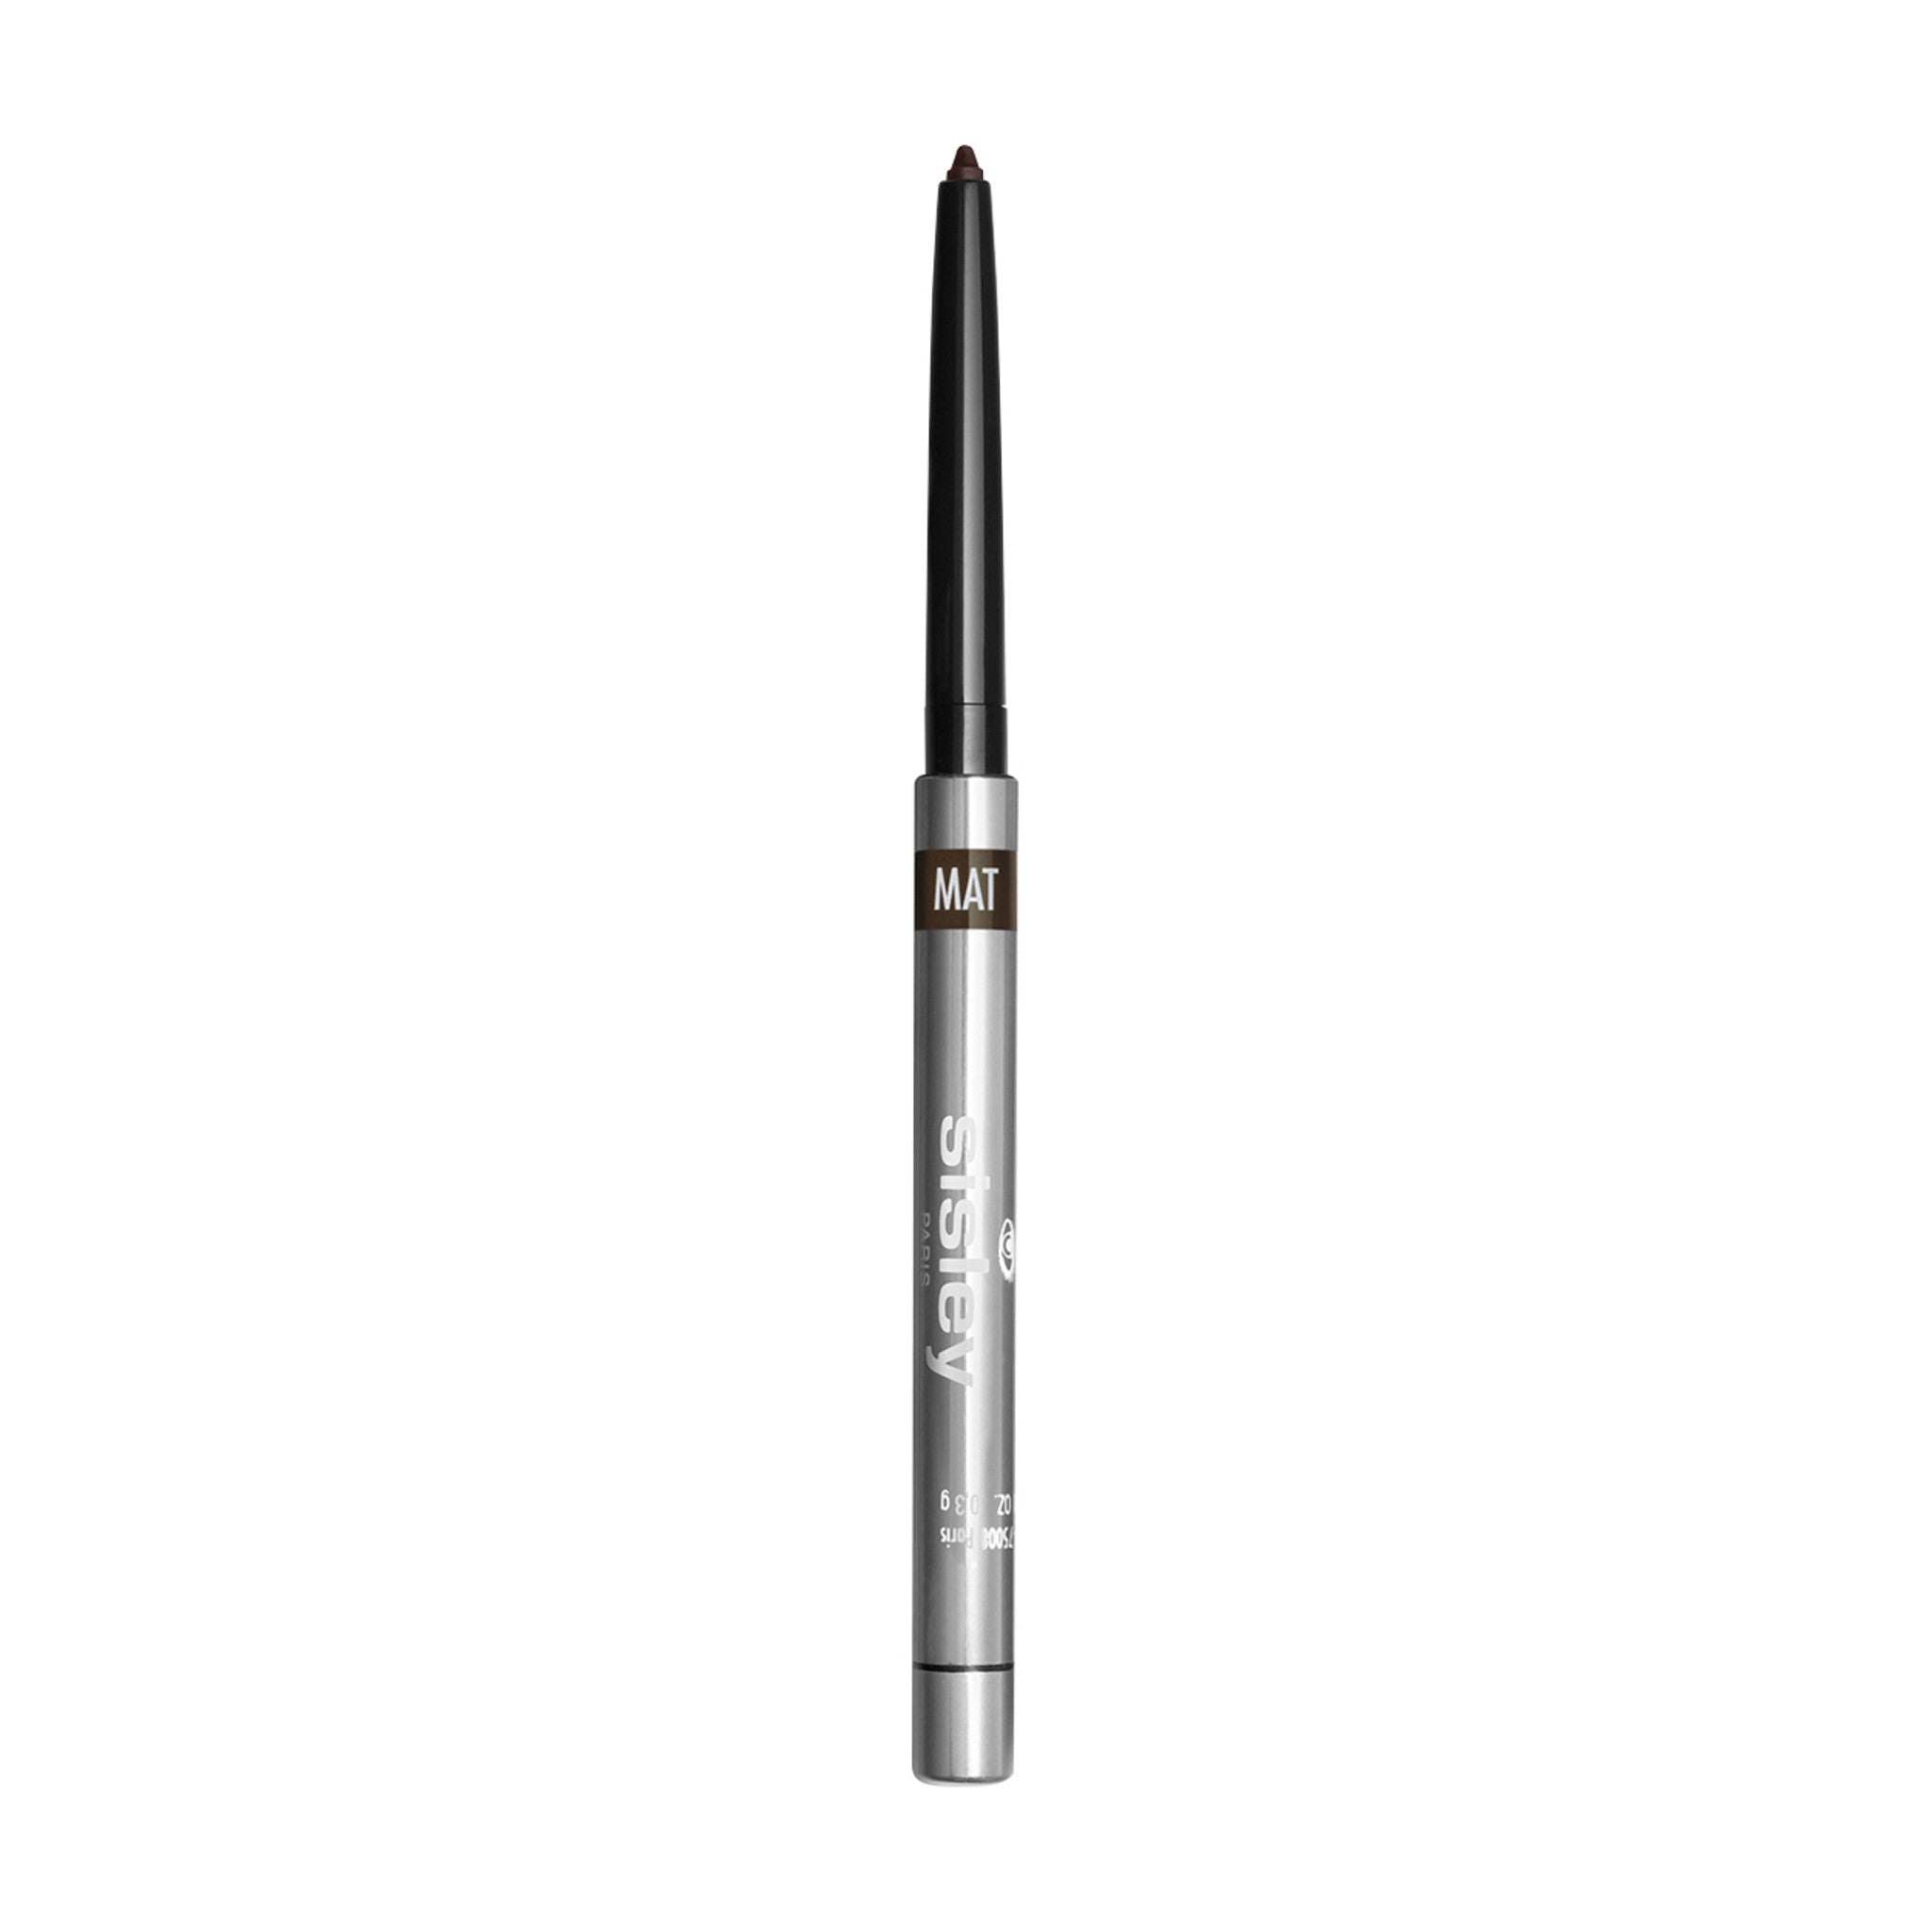 Sisley-Paris Phyto-Khol Star Matte Eye Pencil Color/Shade variant: 2 Matte Tonka main image. This product is in the color brown